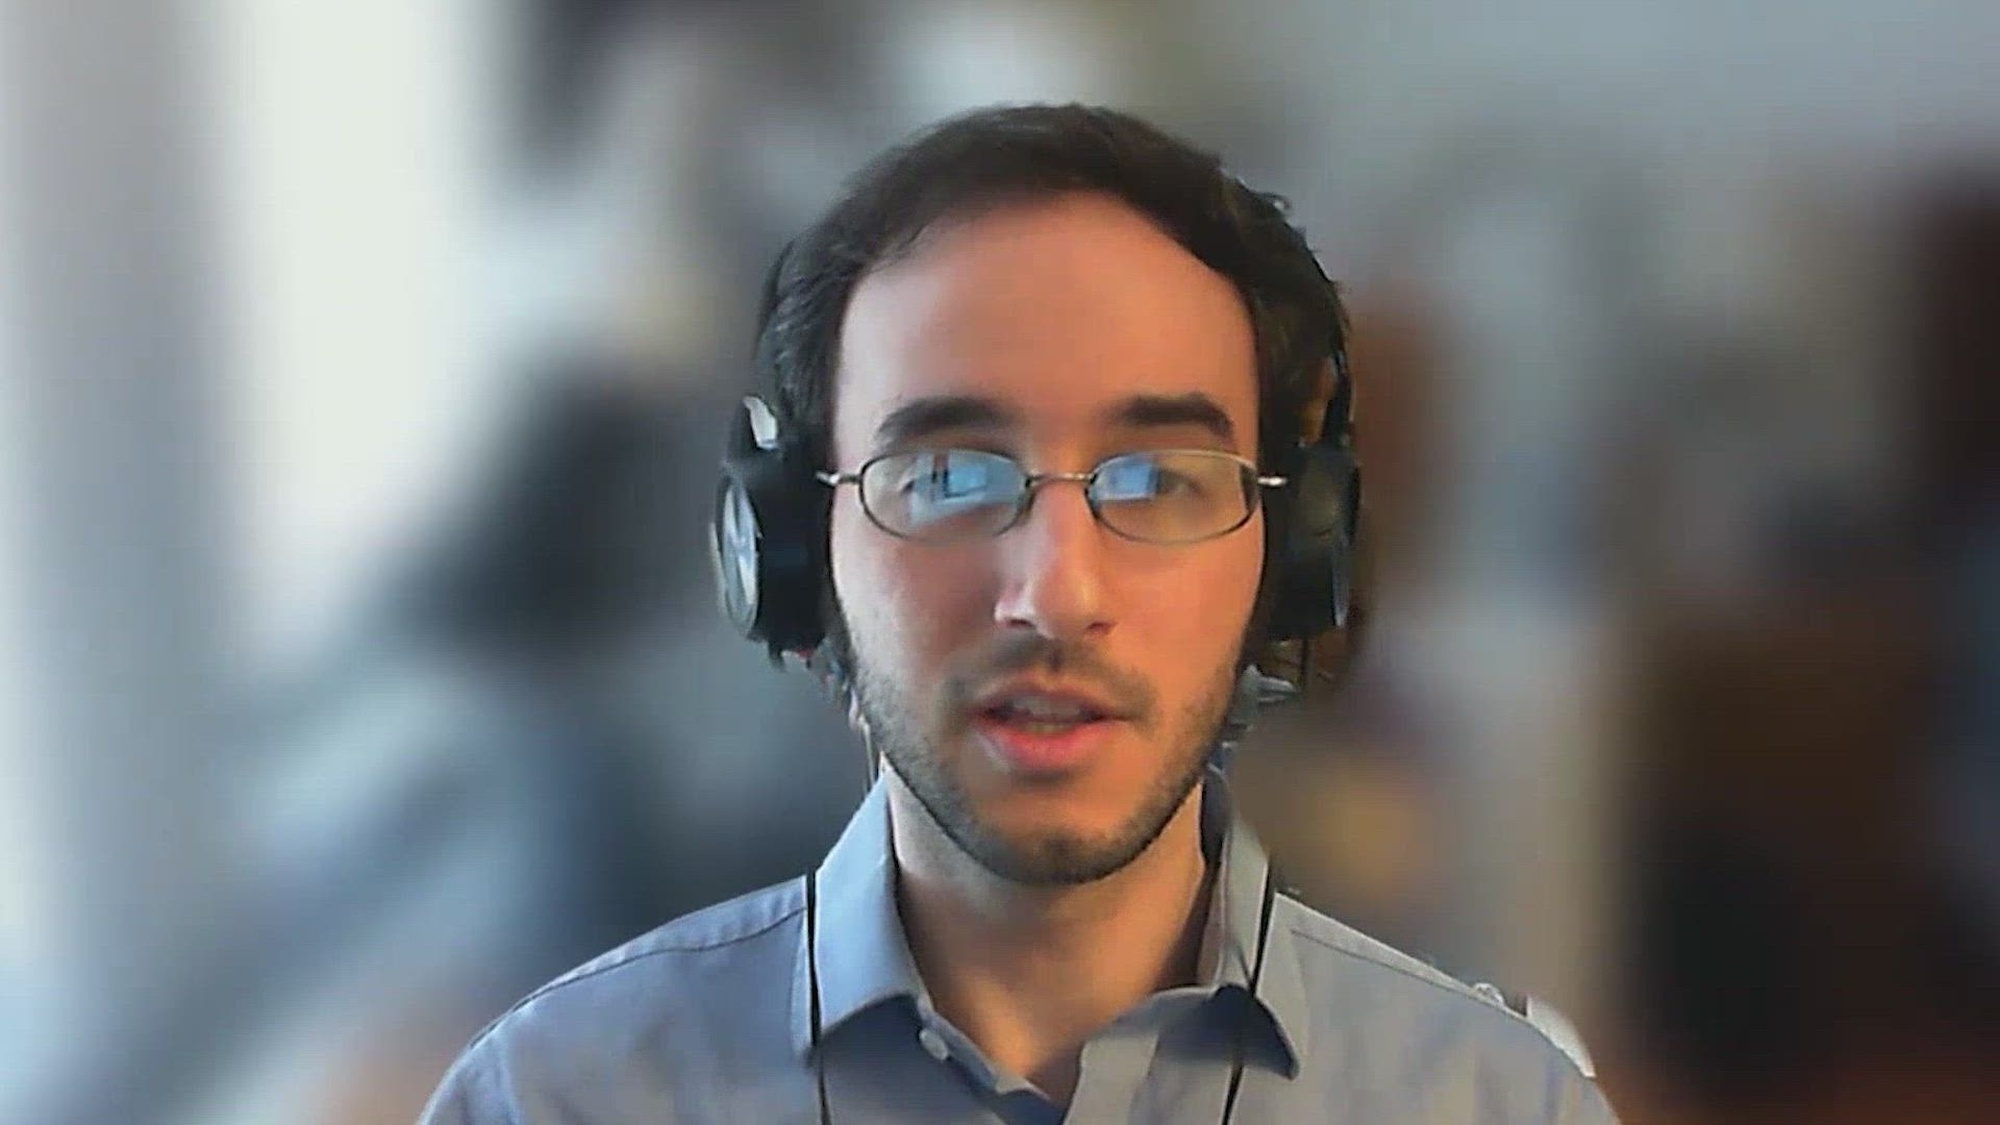 A person wearing headphones speaks to a camera.